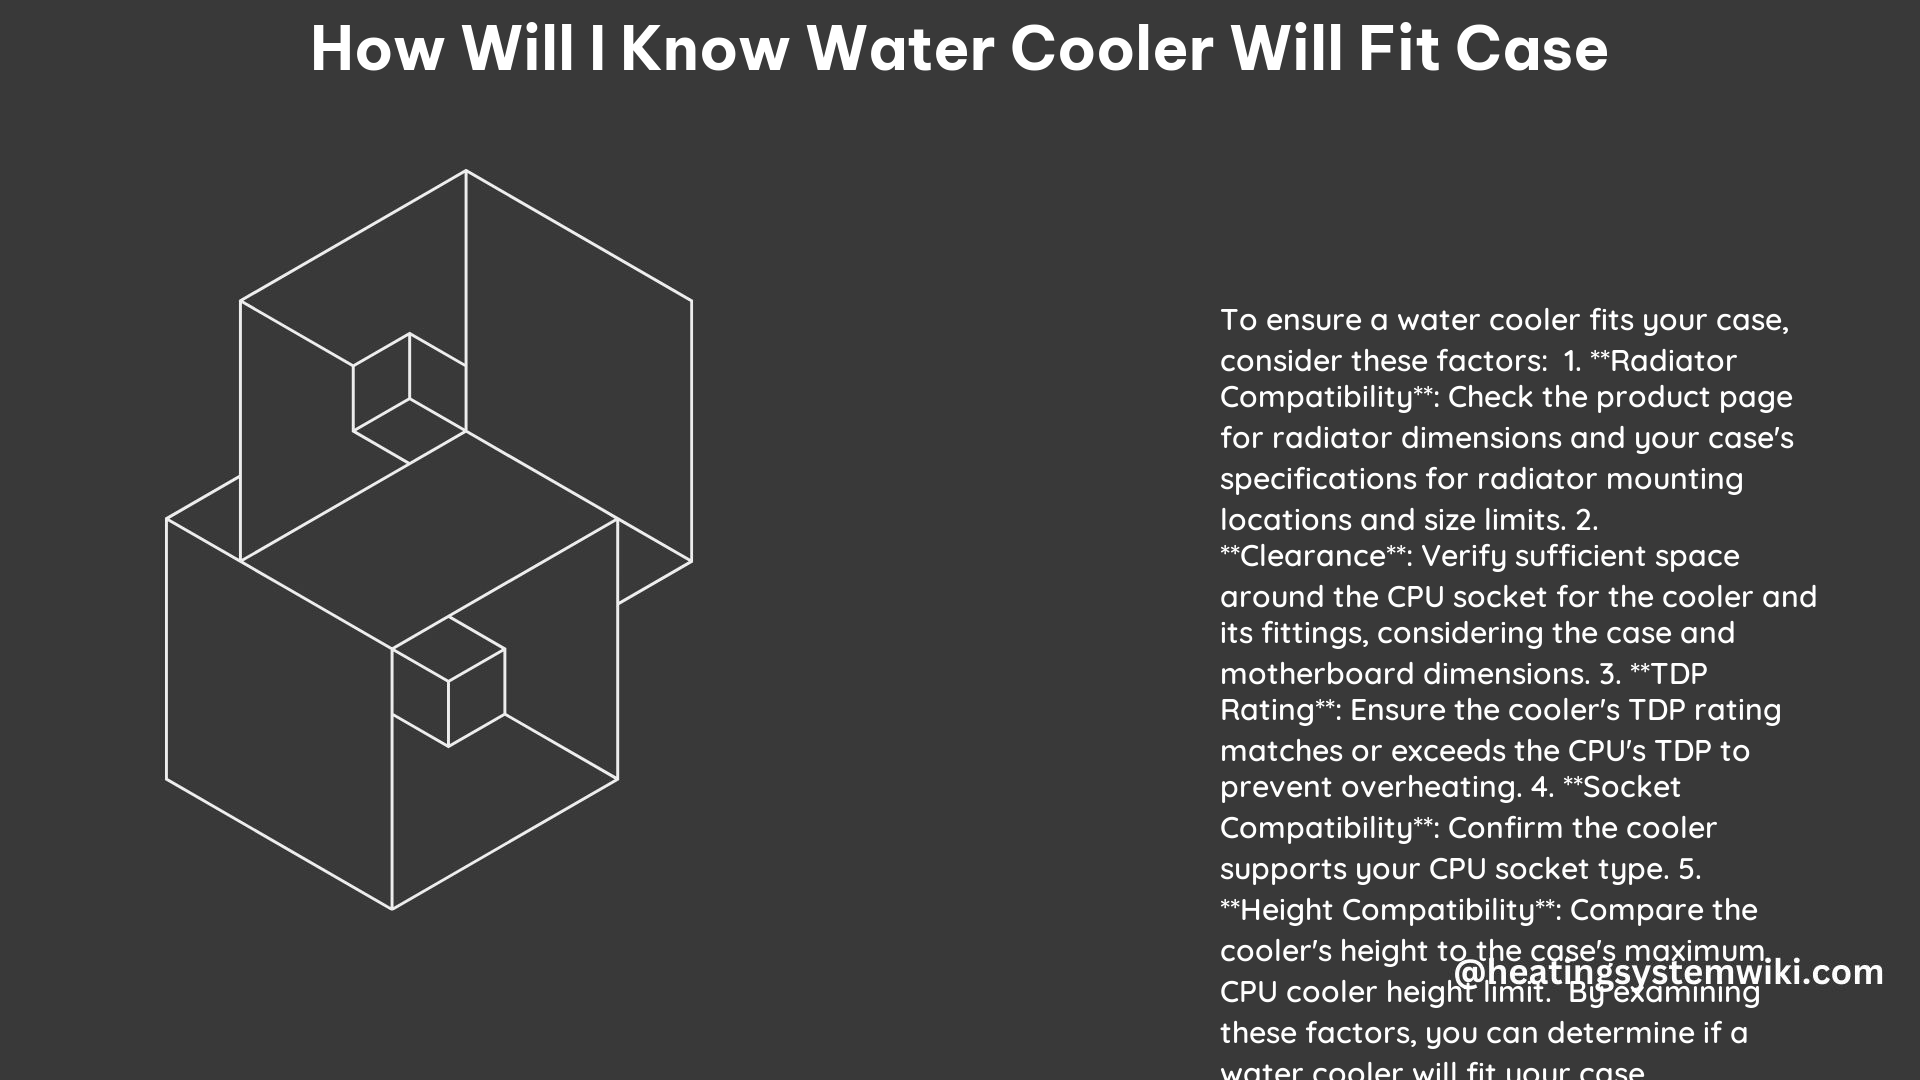 How Will I Know Water Cooler Will Fit Case